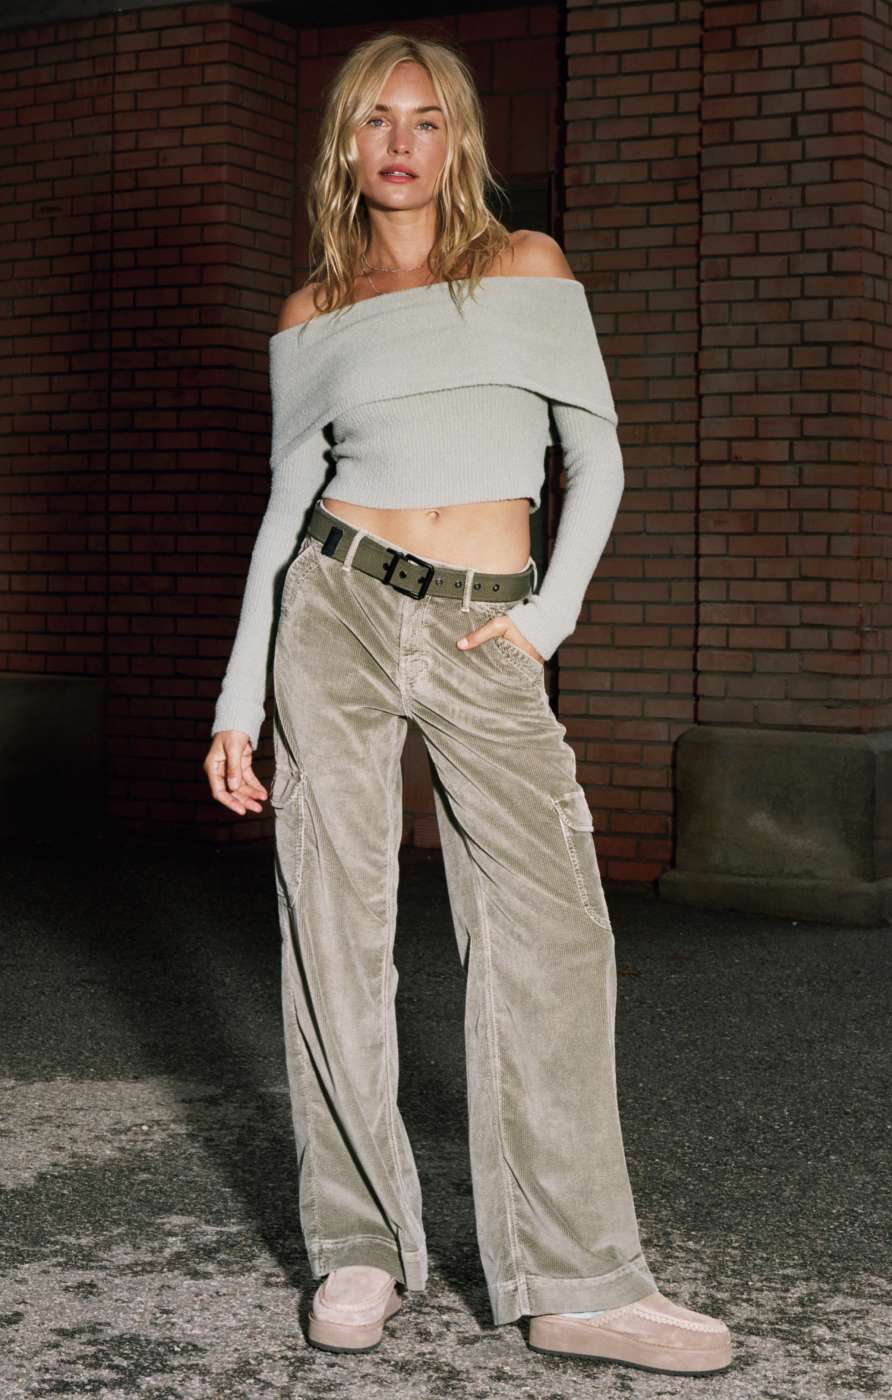 Model wearing cargo pants with belt and top